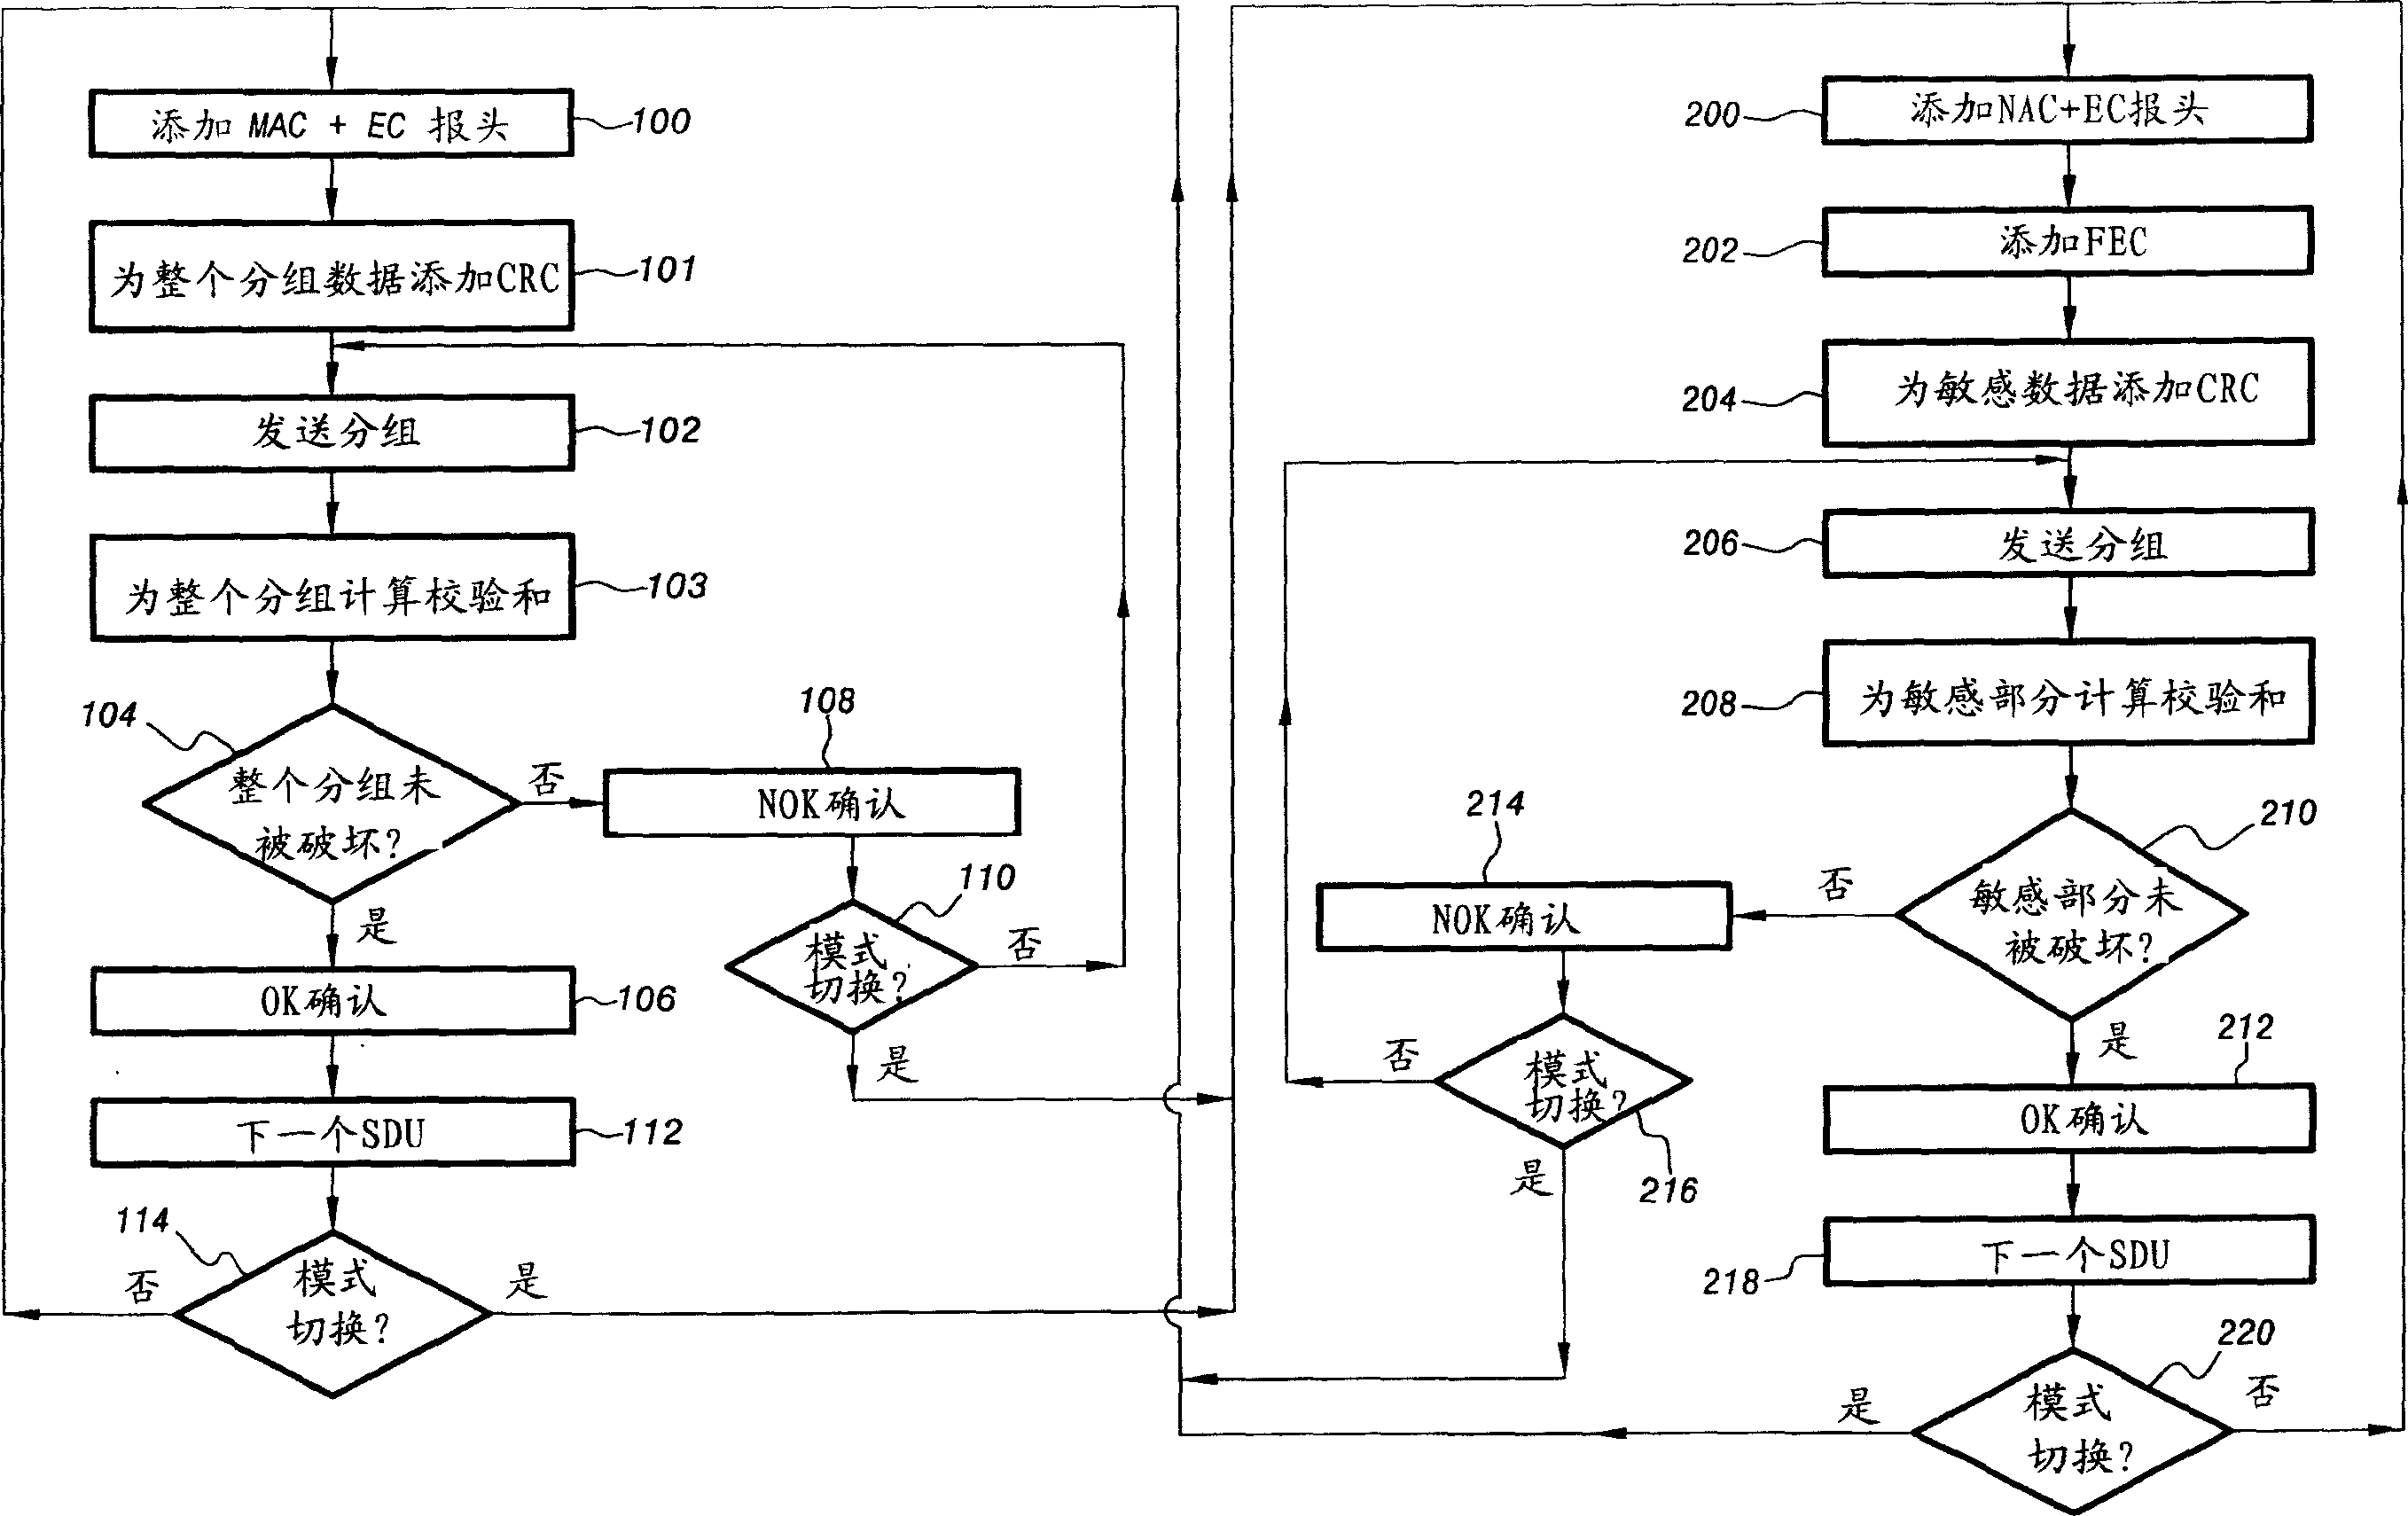 Method for transmitting data including an error control mechanism designated for unreliable networks and error resilience applications